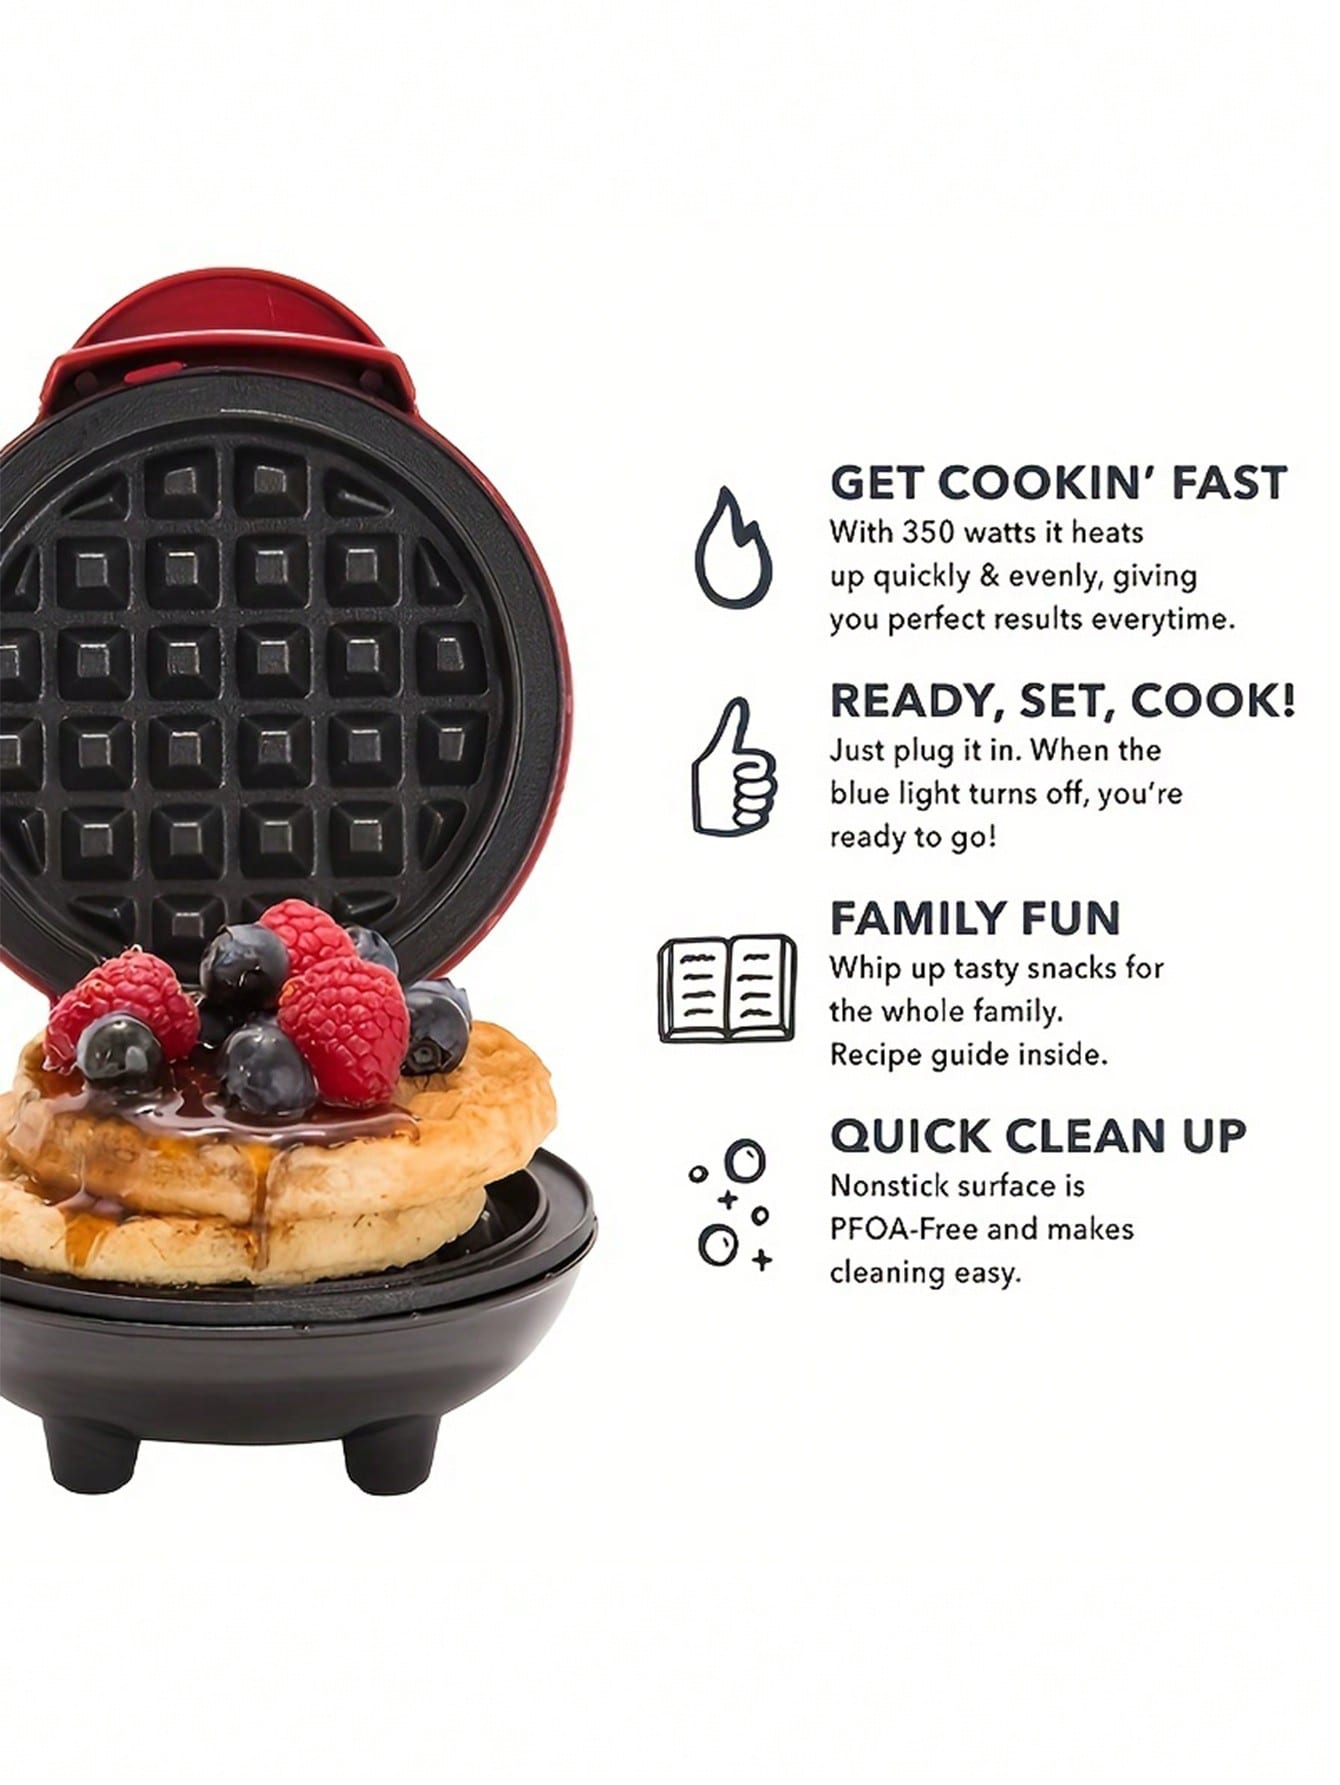 1pc Mini Waffle Maker, Non-stick Waffle Iron, Perfect For Kids' Pancake,  Waffle, Panini, Breakfast, Lunch, Snack, Home Cooking, Compact Design,  Sandwich, Egg, Easy To Clean, A Perfect Christmas Gift.